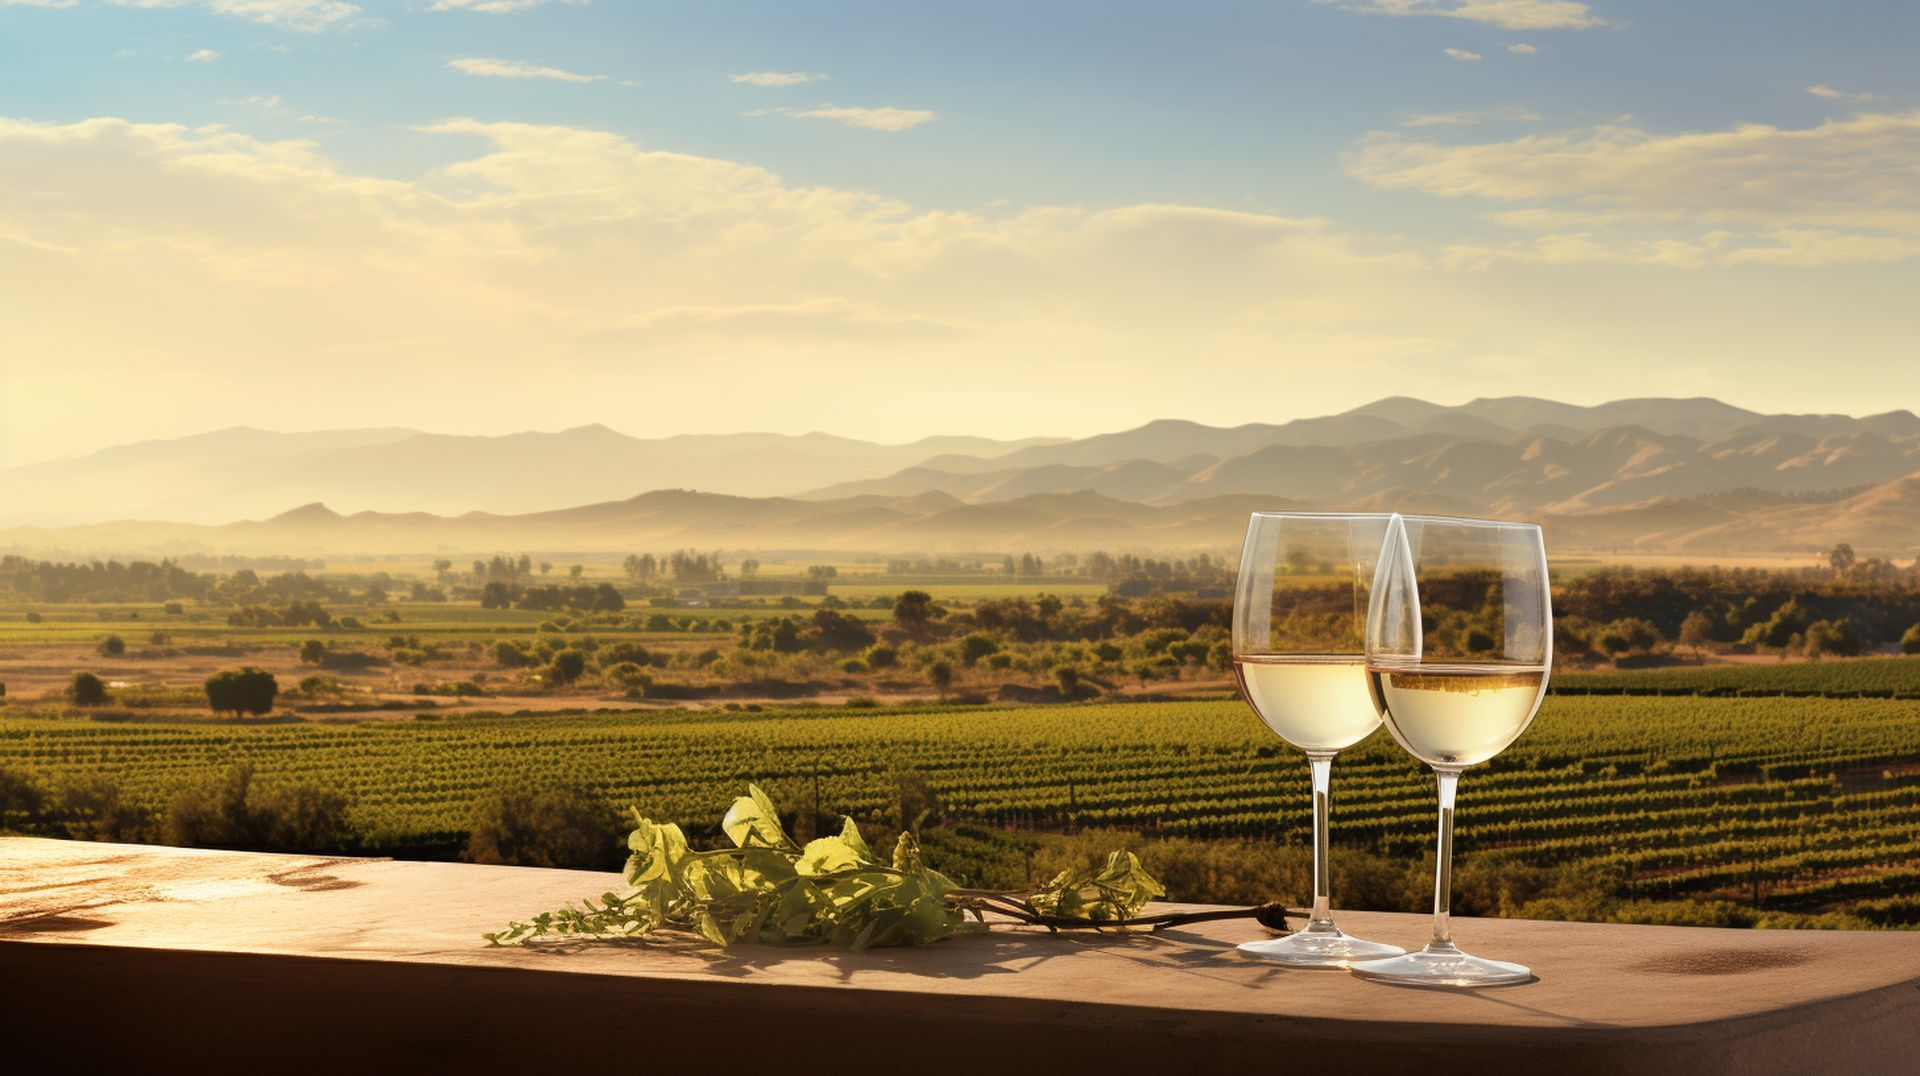 a panoramic view of the Casablanca Valley, capturing the sprawling vineyards under the cool, clear skies, emphasizing the vibrant green of the grapevines. Include close-up shots of dew-kissed Sauvignon Blanc grapes, highlighting their freshness and the cool climate's influence.